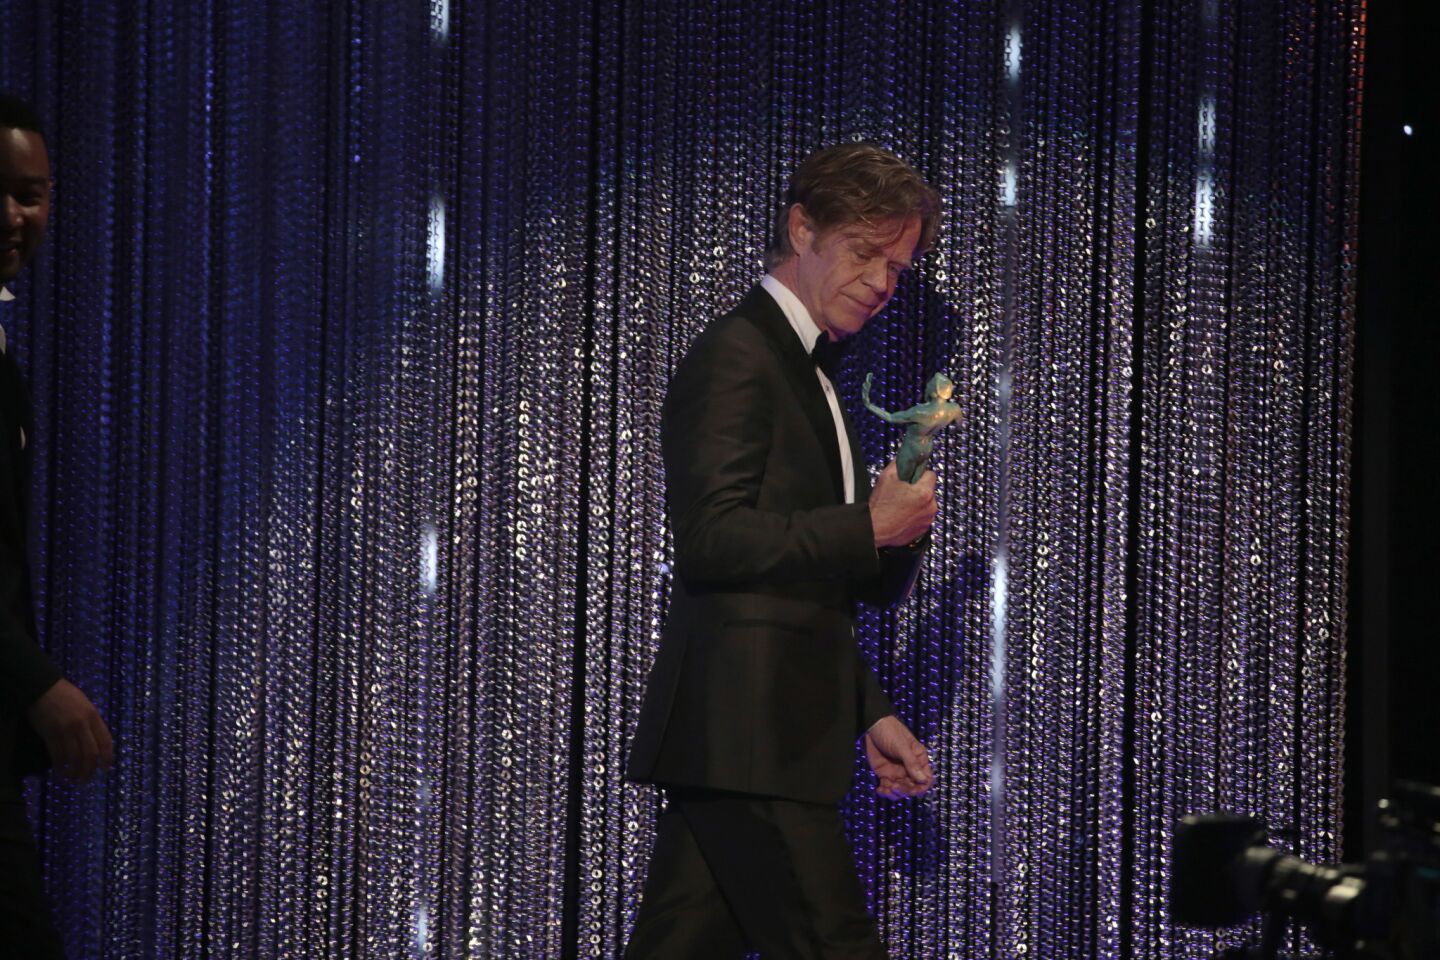 William H. Macy won for male actor in a comedy series for his work in "Shameless."